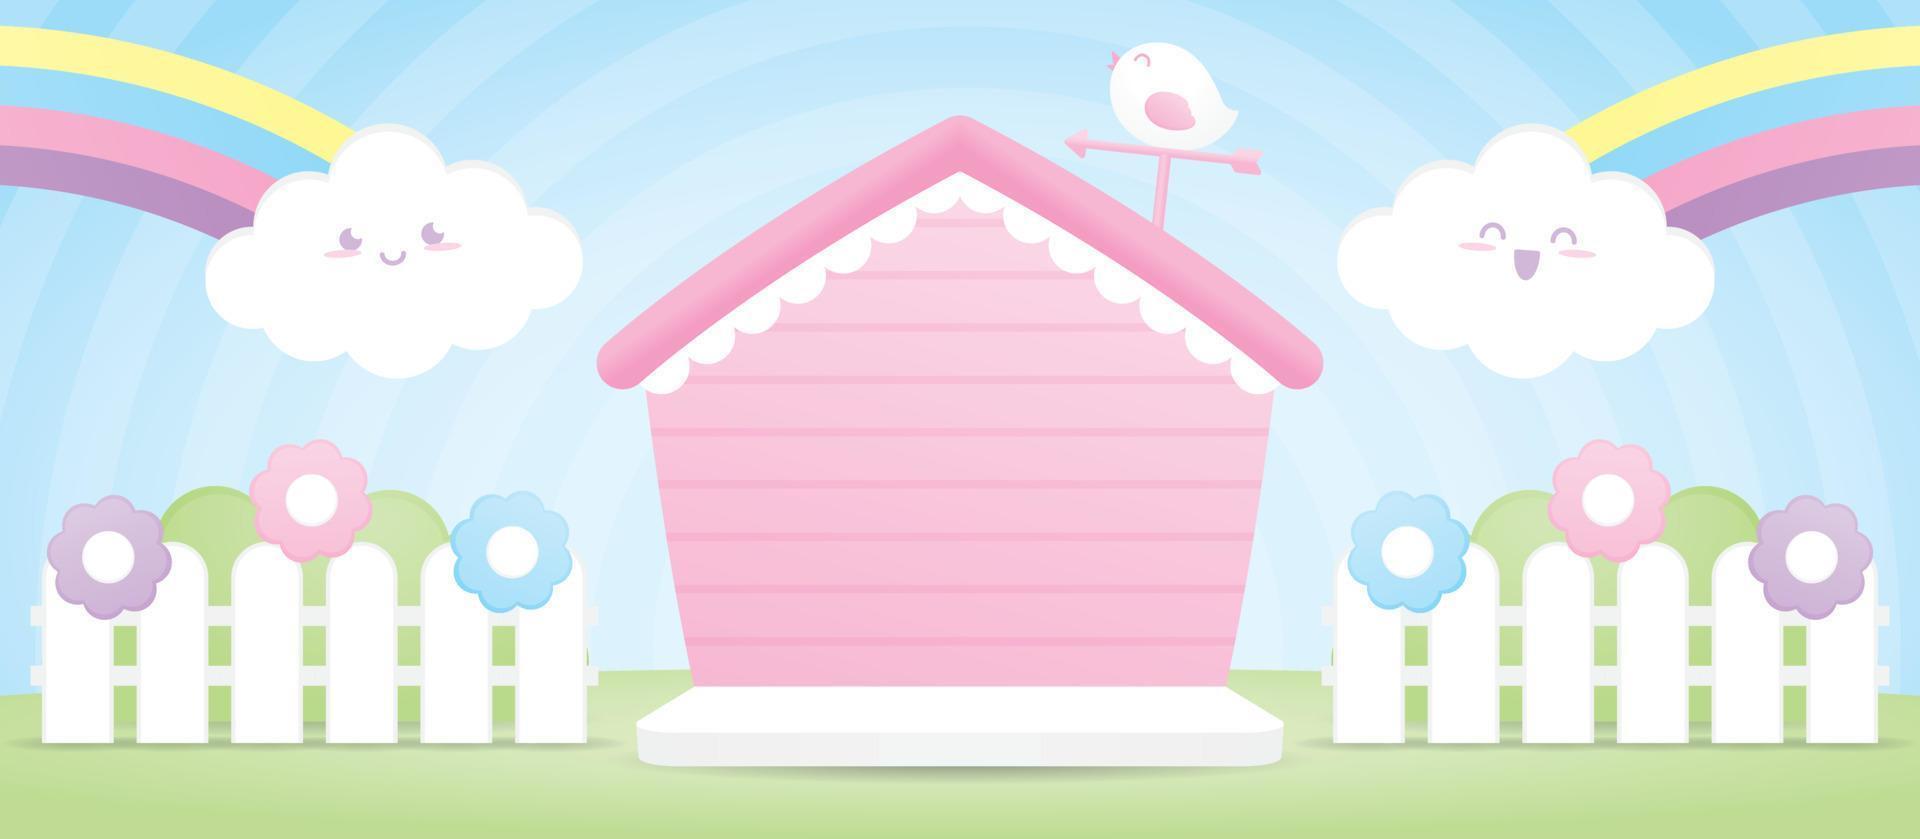 cute kawaii pink house shape backdrop display stage with happy cloud and bird 3d illustration vector for putting baby product or kid object